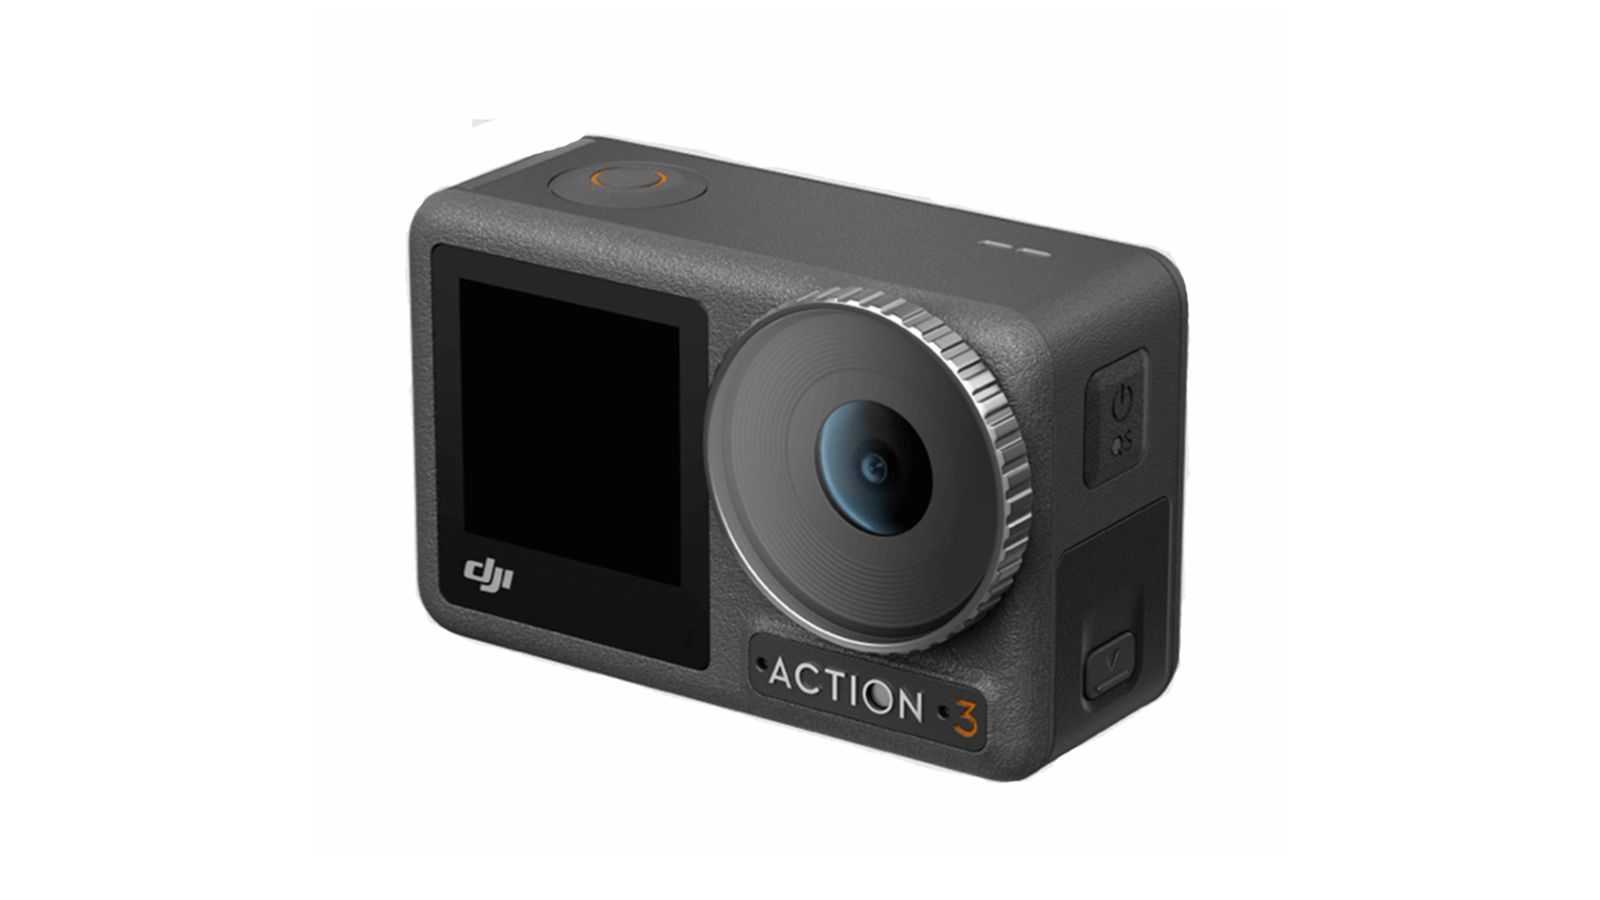 Osmo Action 3 - Action Camera - Beyond the Edge - DJI